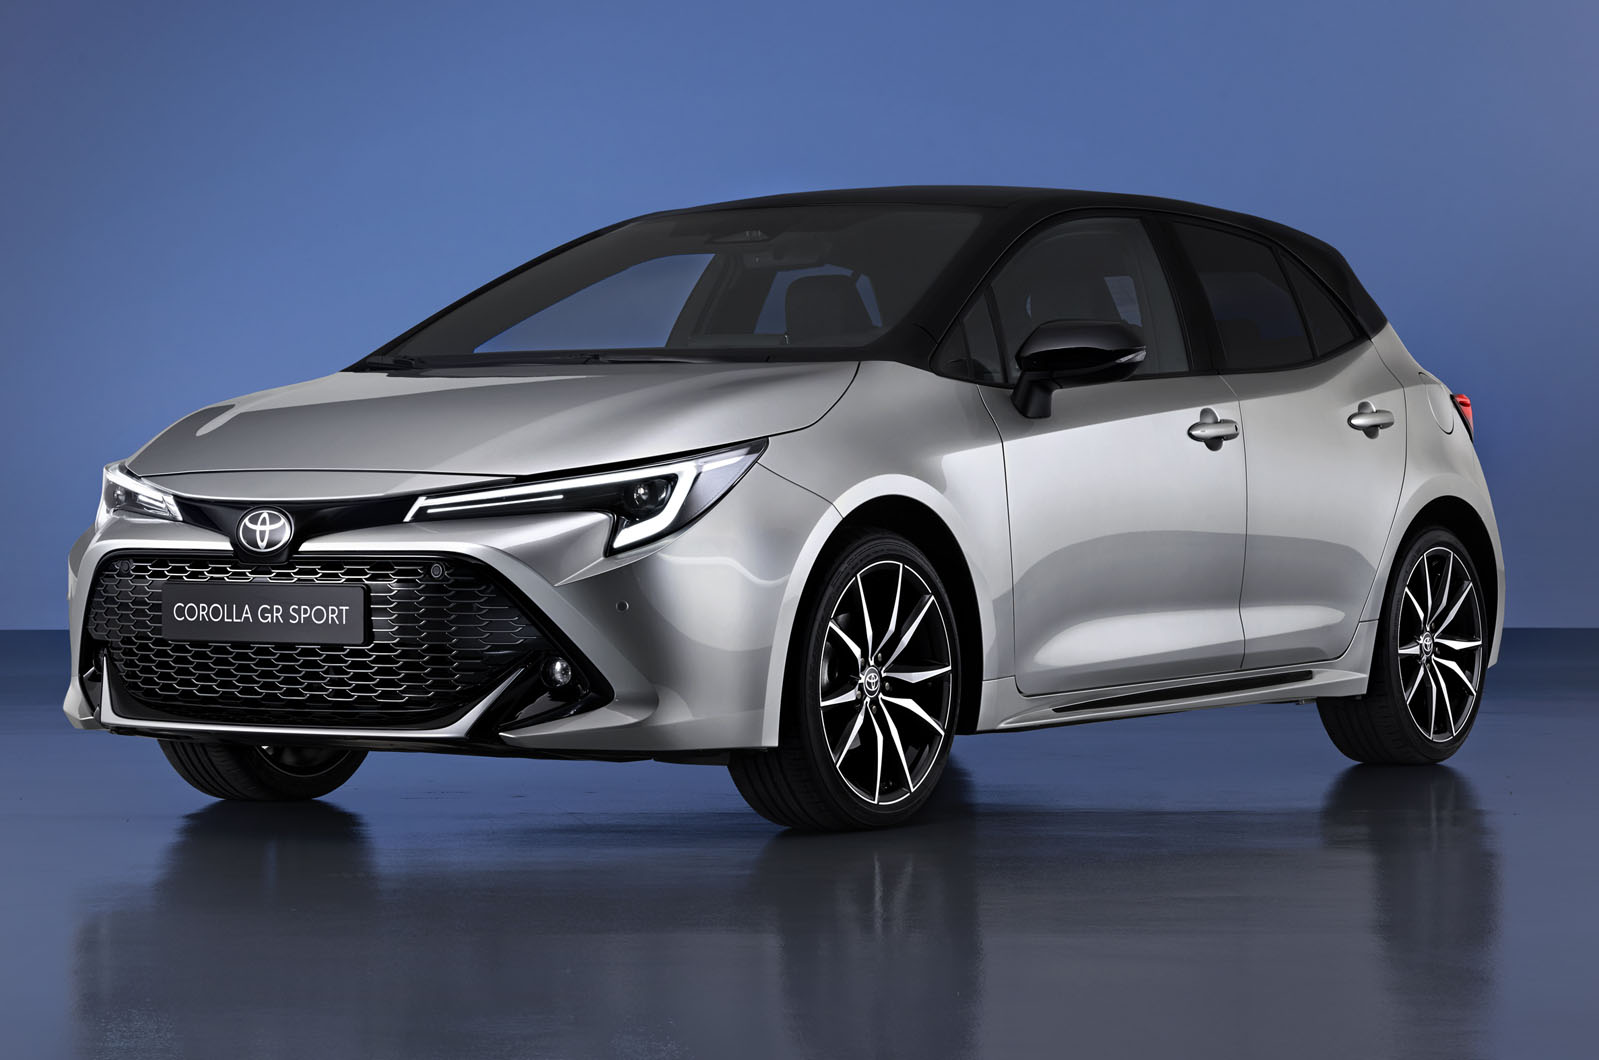 https://www.autocar.co.uk/sites/autocar.co.uk/files/images/car-reviews/first-drives/legacy/2022_toyota_corolla_gr_sport_wp_003.jpg